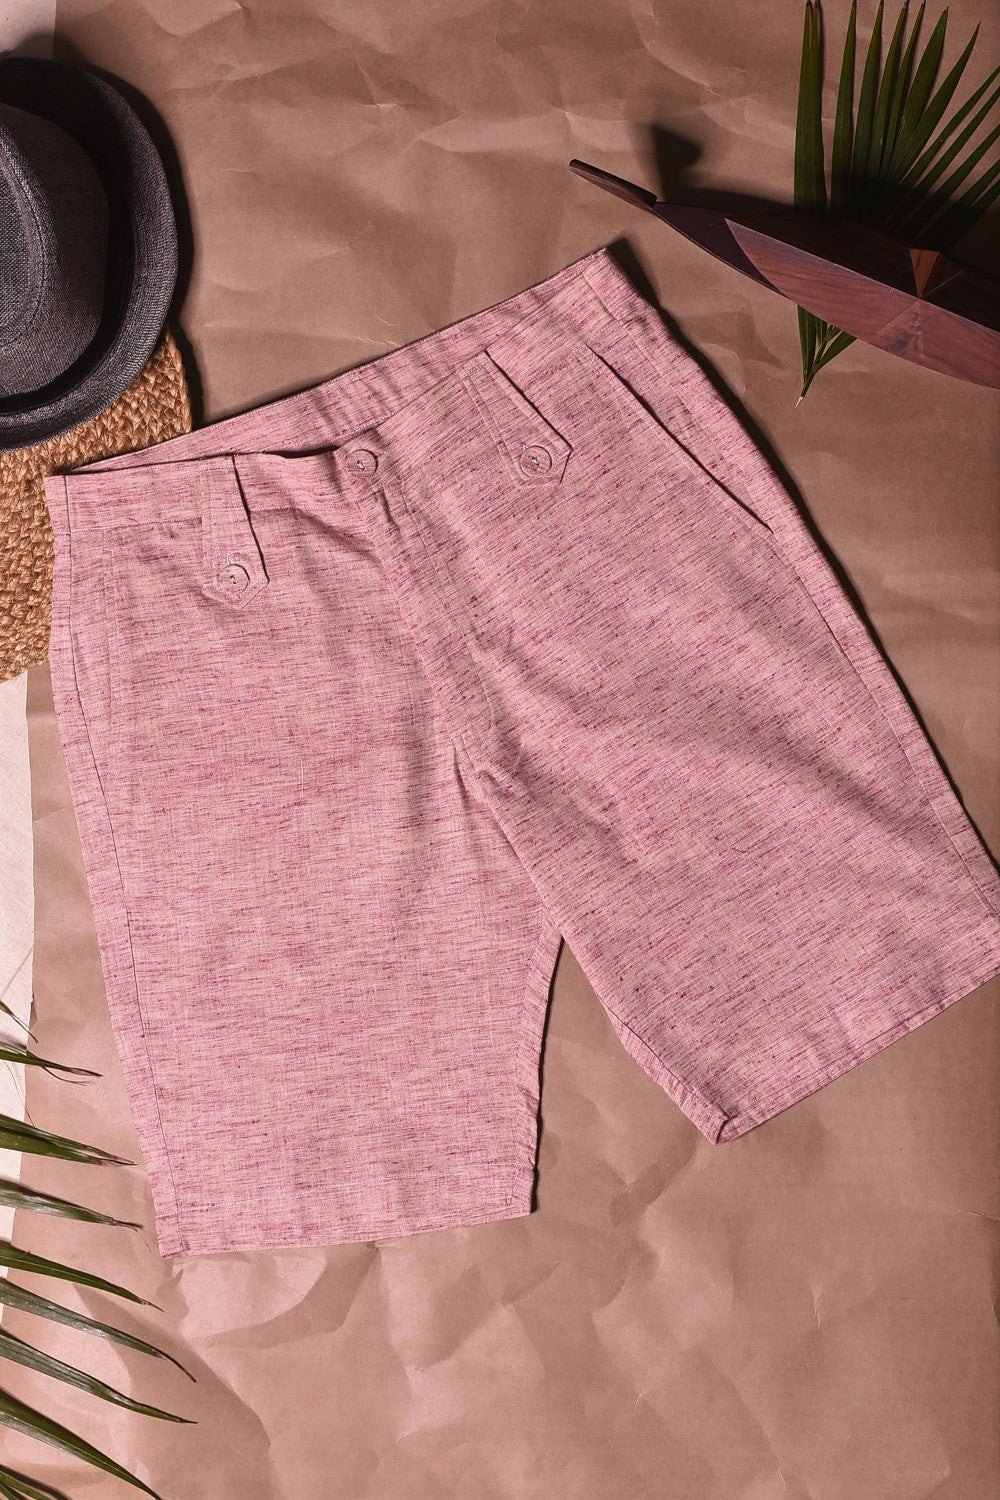 Pink Textured Pocket Shorts by Charkhee with Bottoms, Casual Wear, Cotton, Fitted at Waist, For Siblings, Less than $50, Mens Bottom, Menswear, Natural, Raspberry, Regular Fit, Shorts, Sun-dae by Charkhee, Textured at Kamakhyaa for sustainable fashion